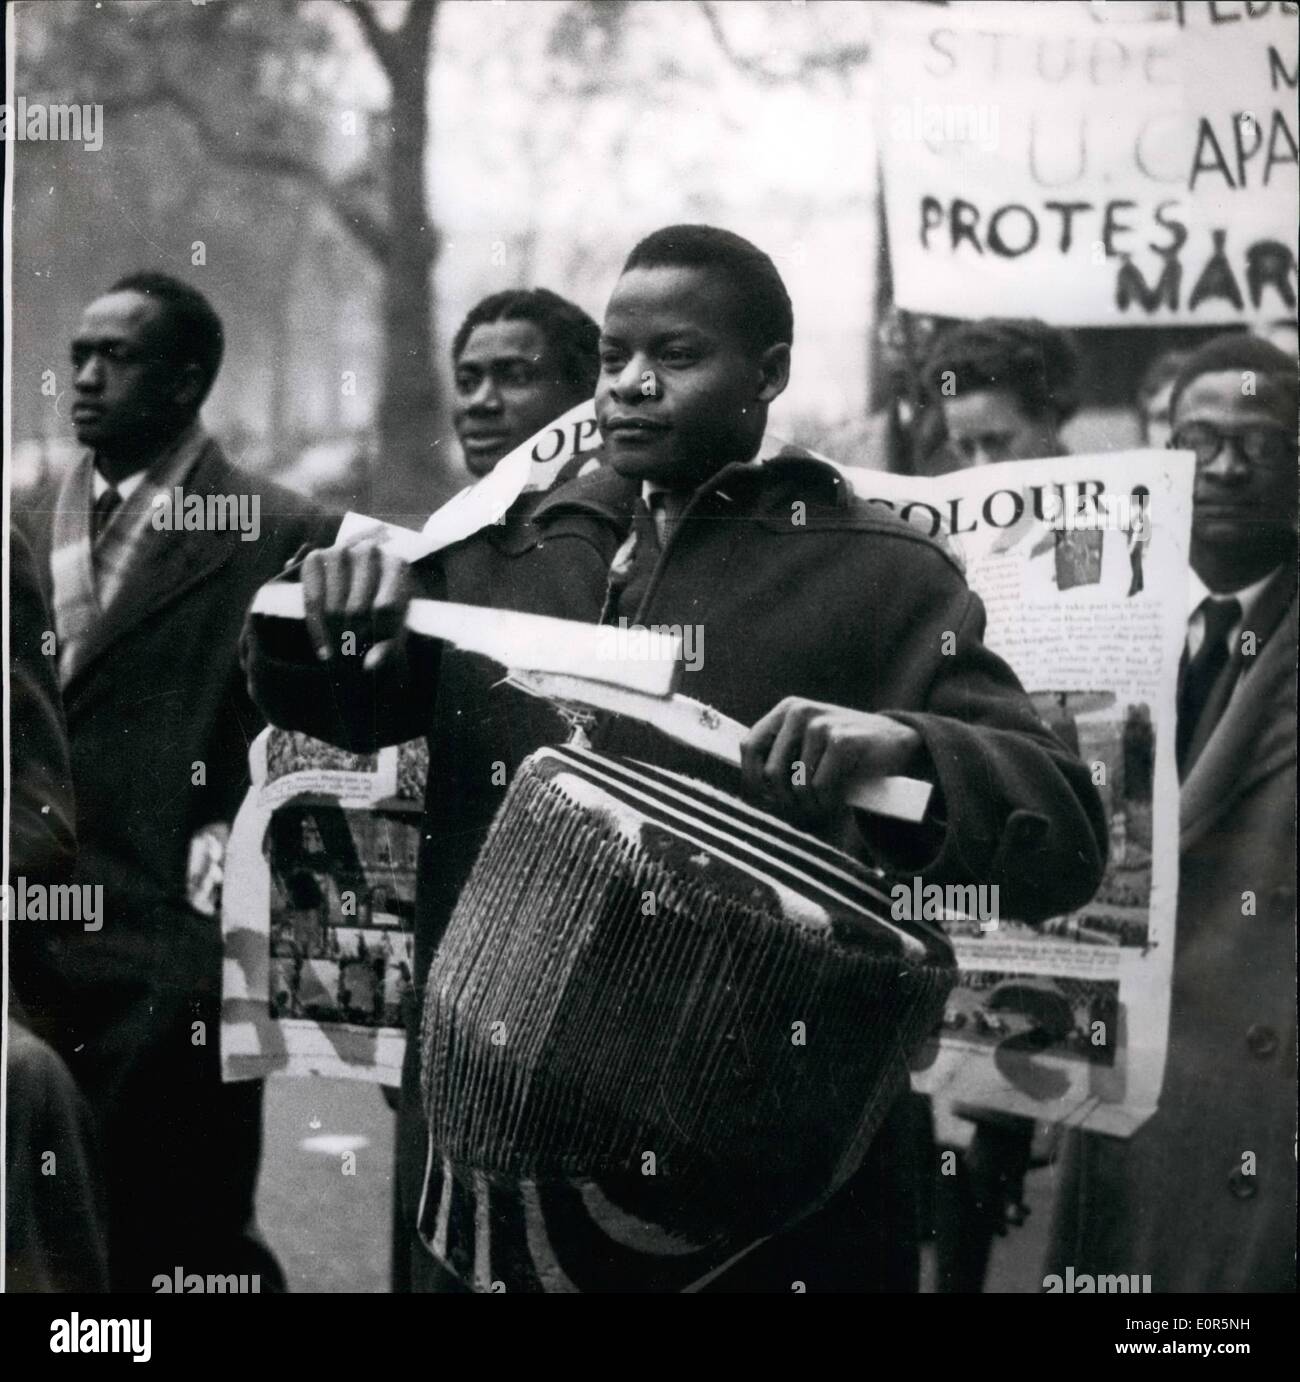 Mar. 03, 1958 - African Students hold Demon Tation March in London.: Kanyama Chiume only one of Nyasaland Nationalist leaders to escape last week's mass arrests yesterday led a demonstration march of African students through the Streets of London . The demonstration demand the release of Dr. Hastings Banda leader of those rounded of during recent Nyasaland disturmances Photo shows one of the demonstrators with a leopard-skin covered drum - during the parade in London yesterday. About 1,000 Africans took part, Stock Photo